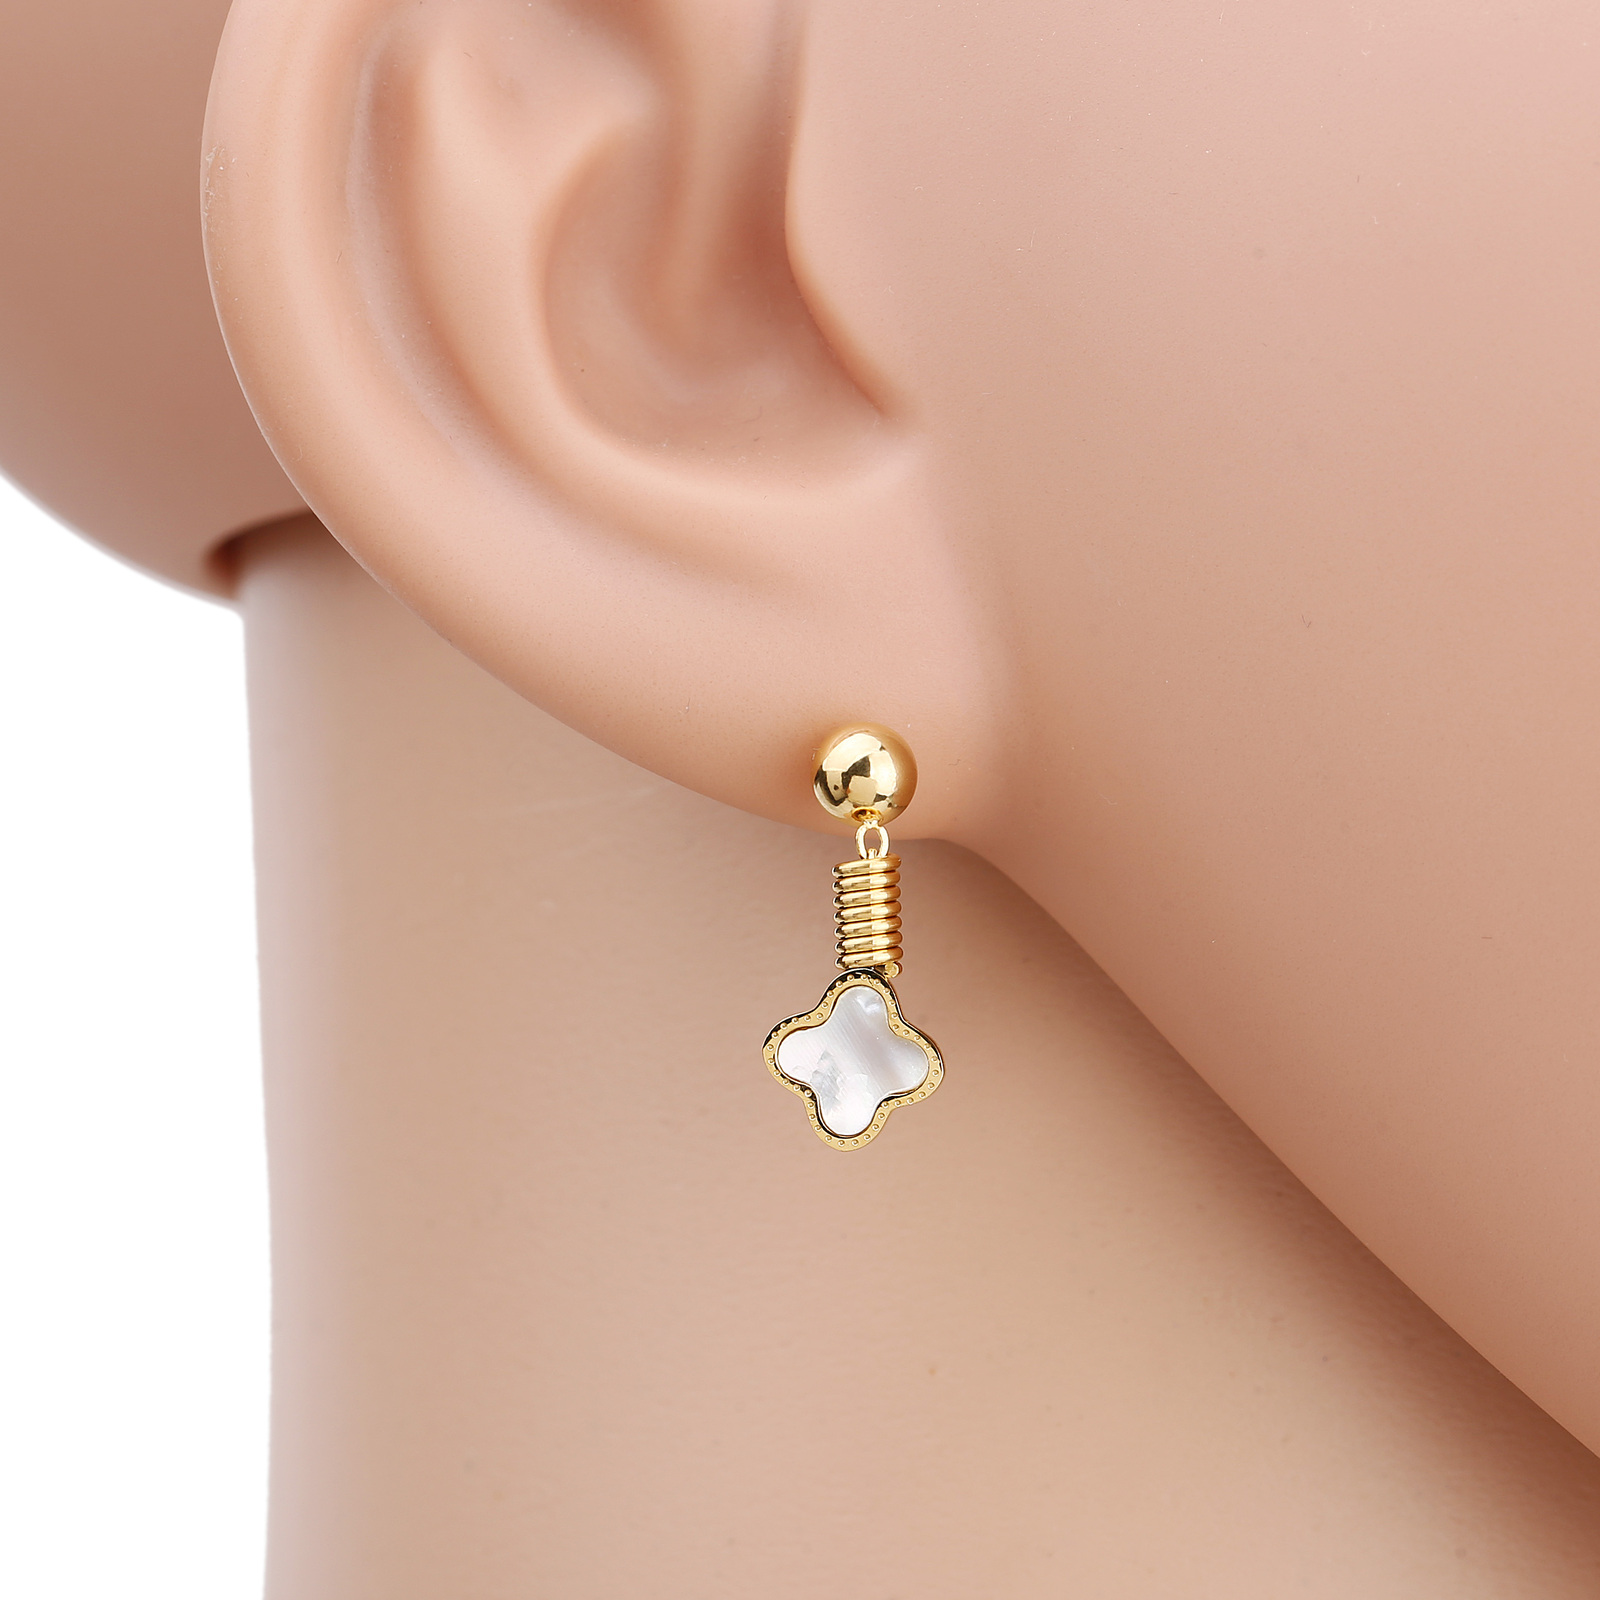 Petite Gold Tone Clover Earrings With Faux Mother of Pearl Inlay - $22.99